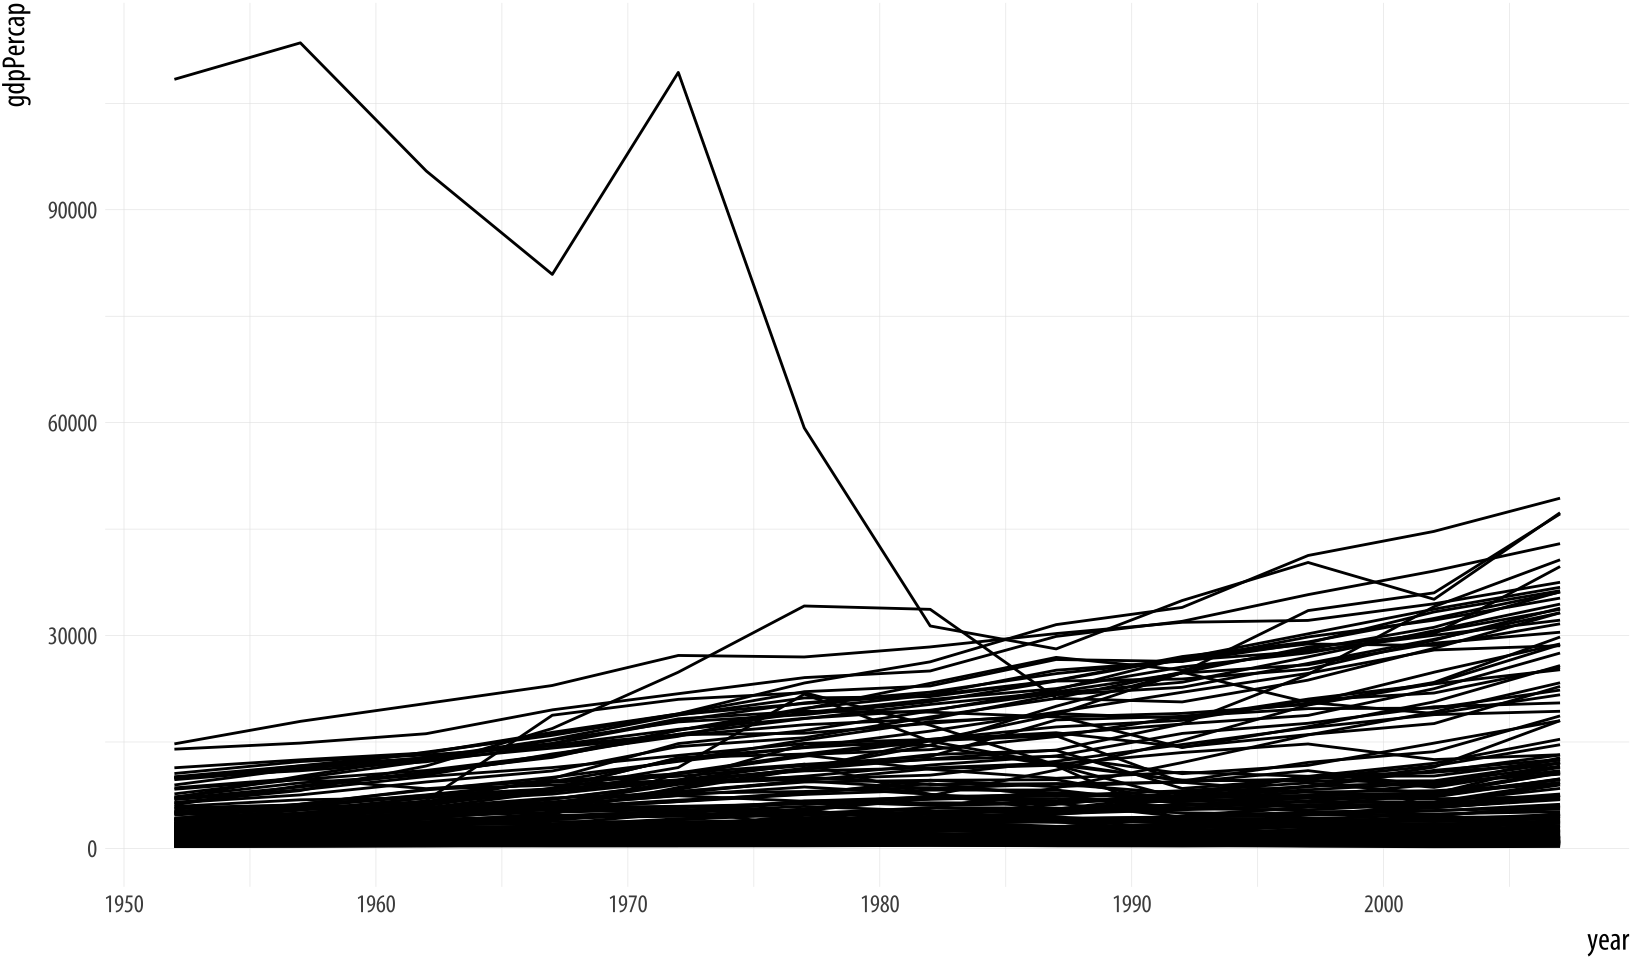 Plotting the data over time by country, again.